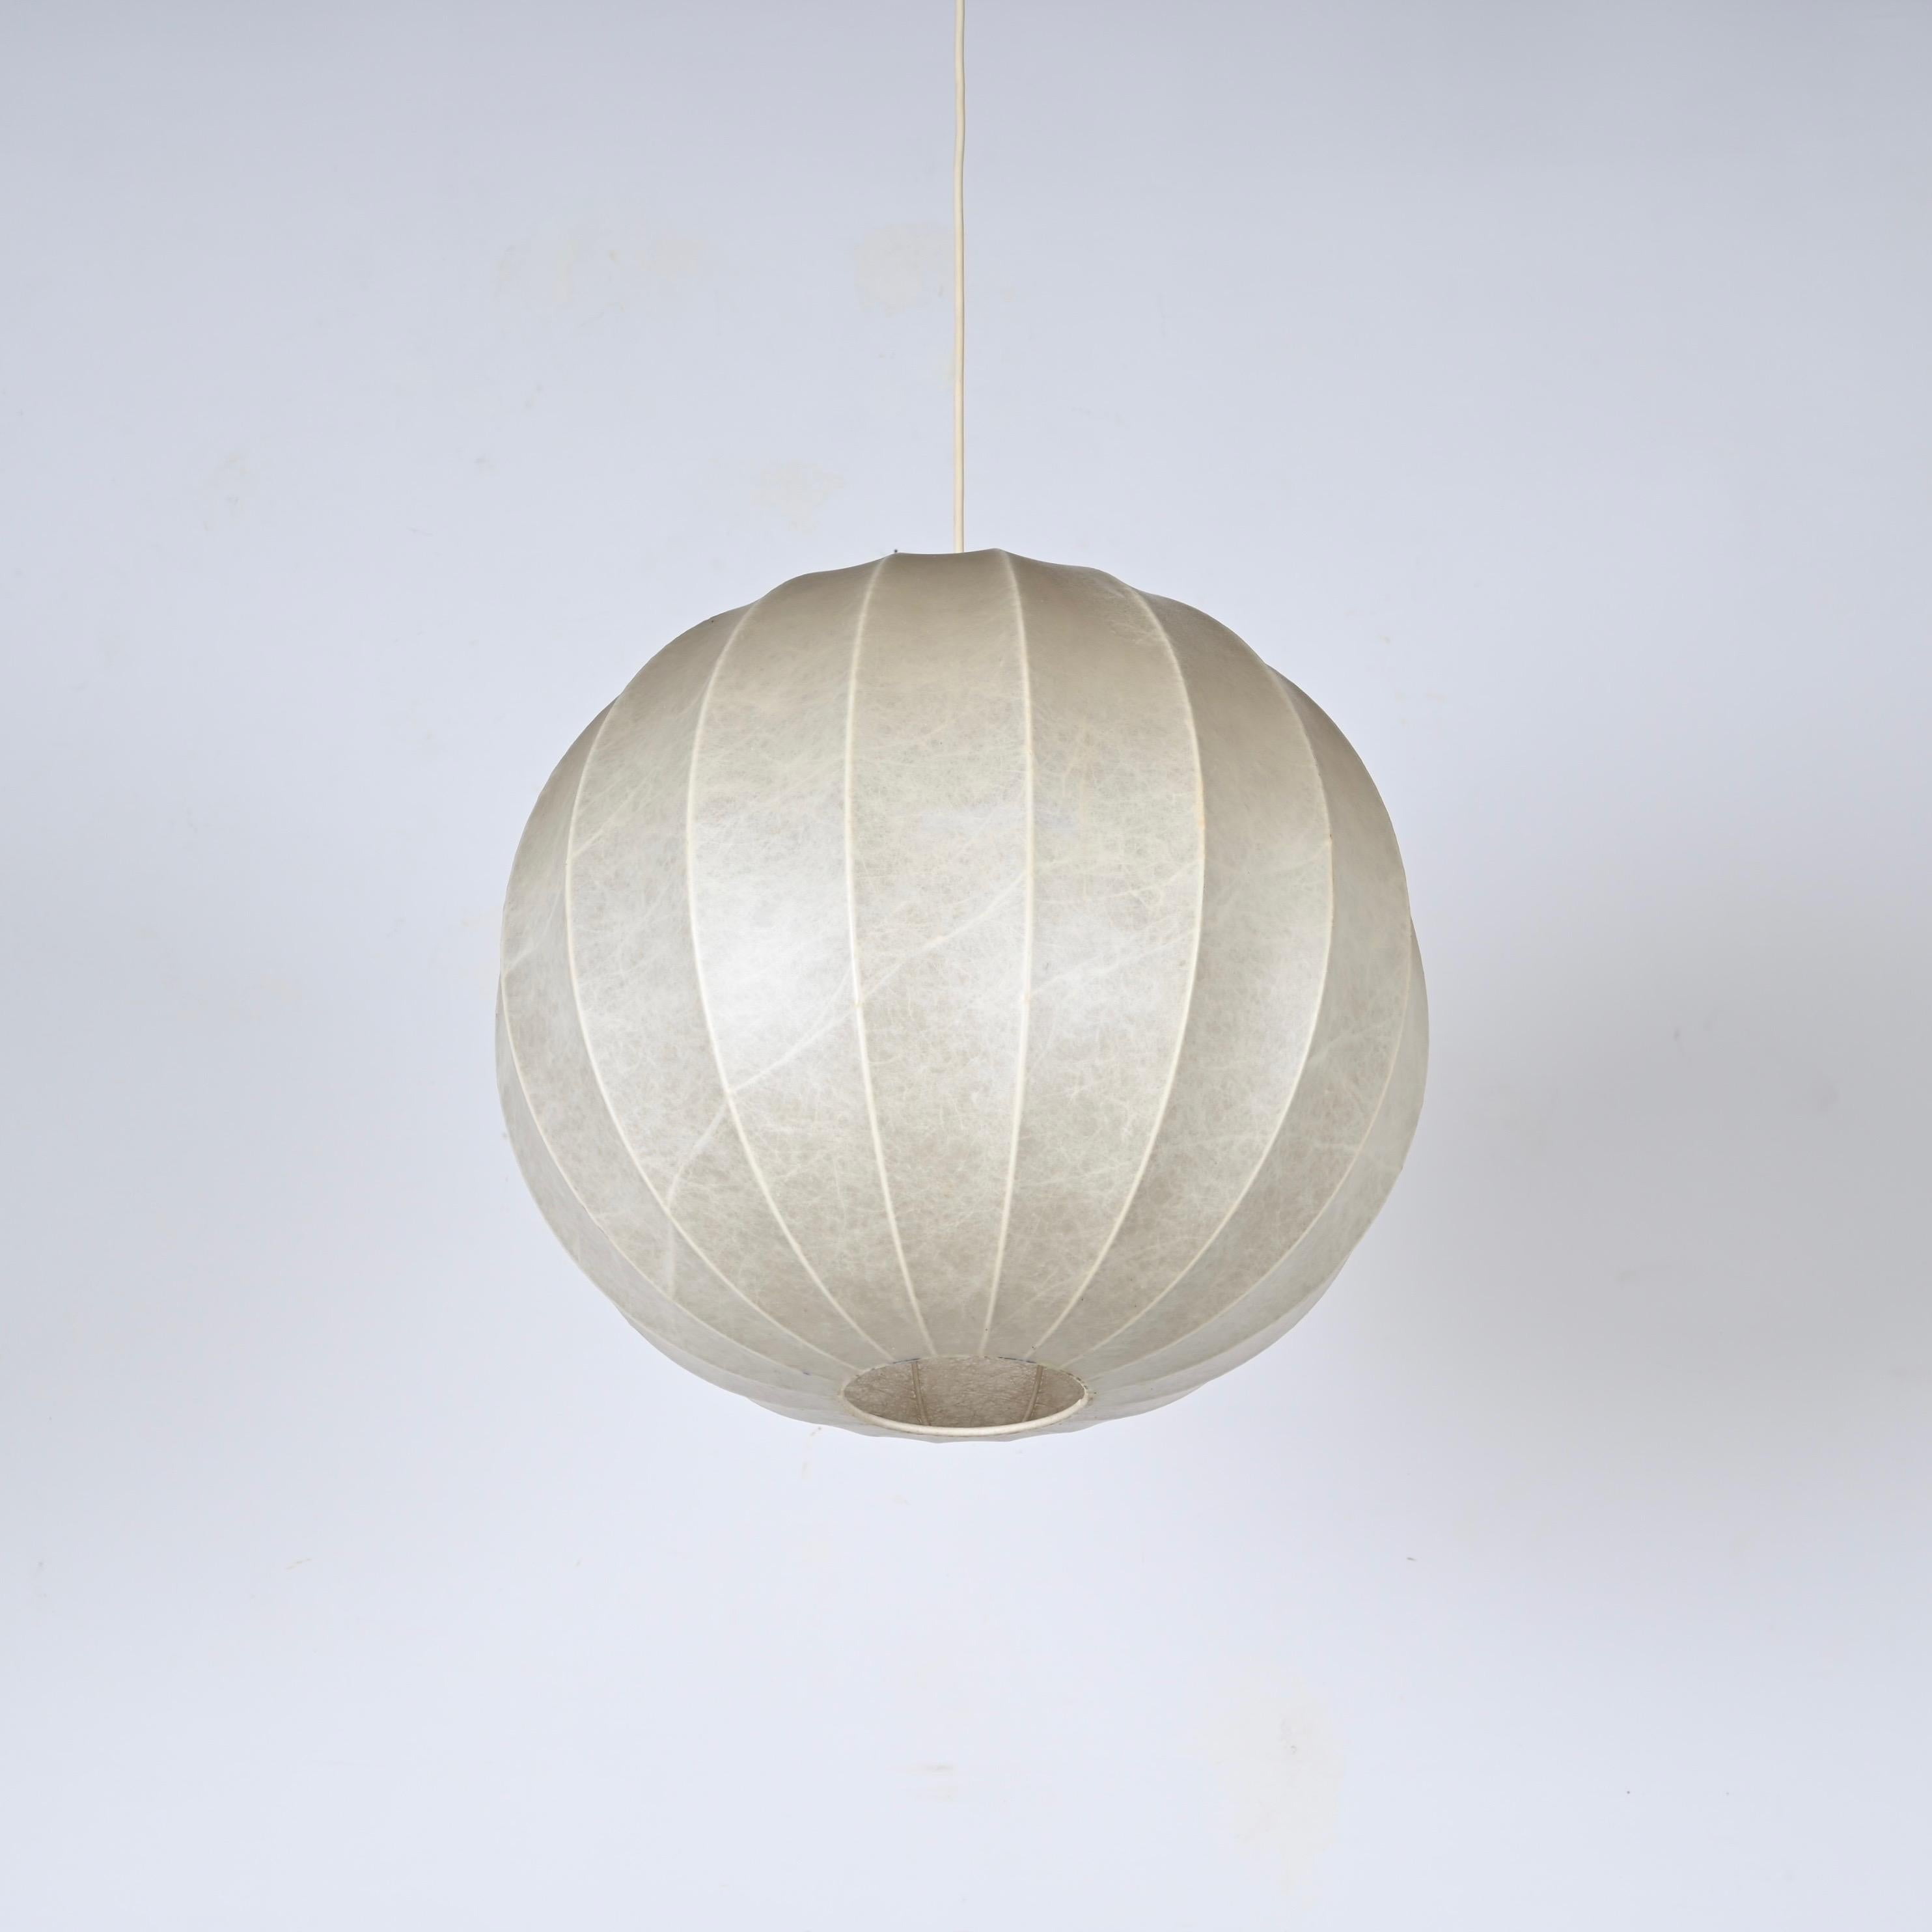 Gorgeous large 'Cocoon' pendant. This lovely lamp was designed by Achille Castiglioni in Italy in the 1960s.

This iconic piece features a round lampshade in natural soft resin with a fantastic color, the metal structure is covered by the resin in